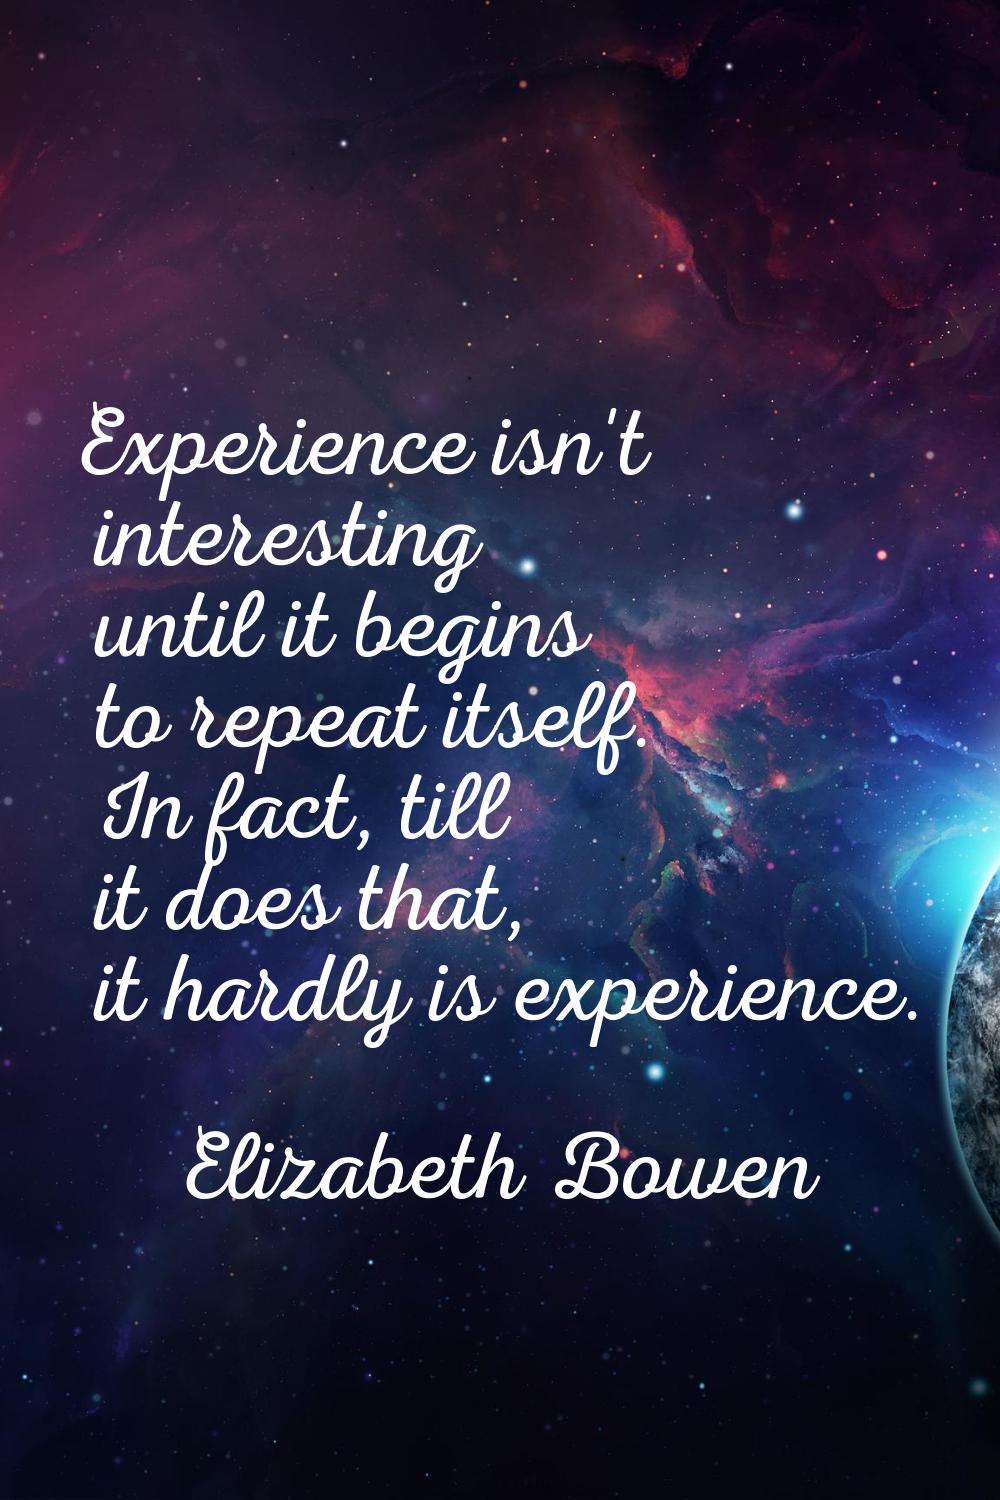 Experience isn't interesting until it begins to repeat itself. In fact, till it does that, it hardl